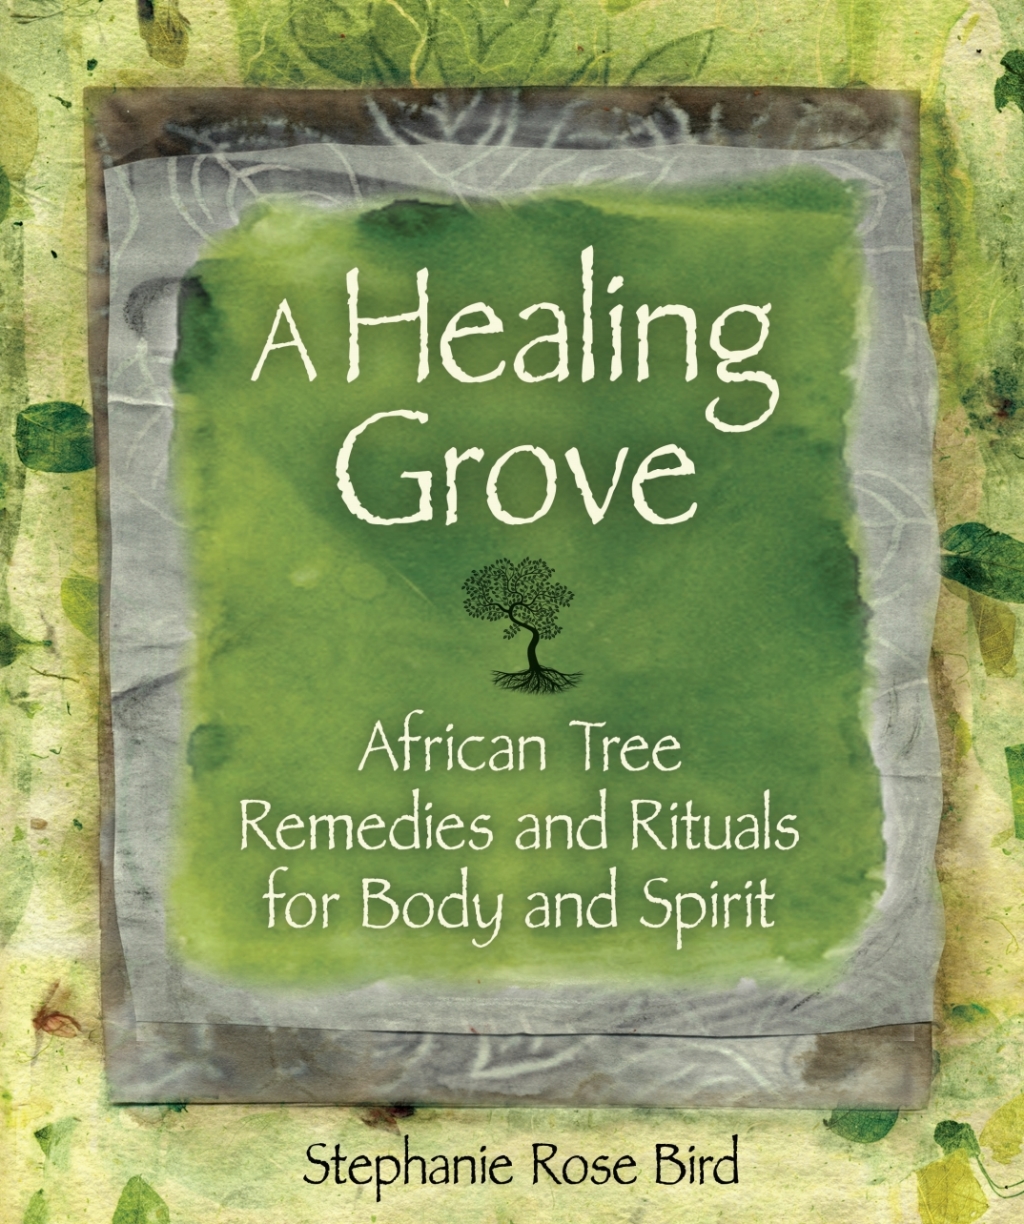 A Healing Grove: African Tree Remedies and Rituals for the Body and Spirit (eBook) - Stephanie Rose Bird